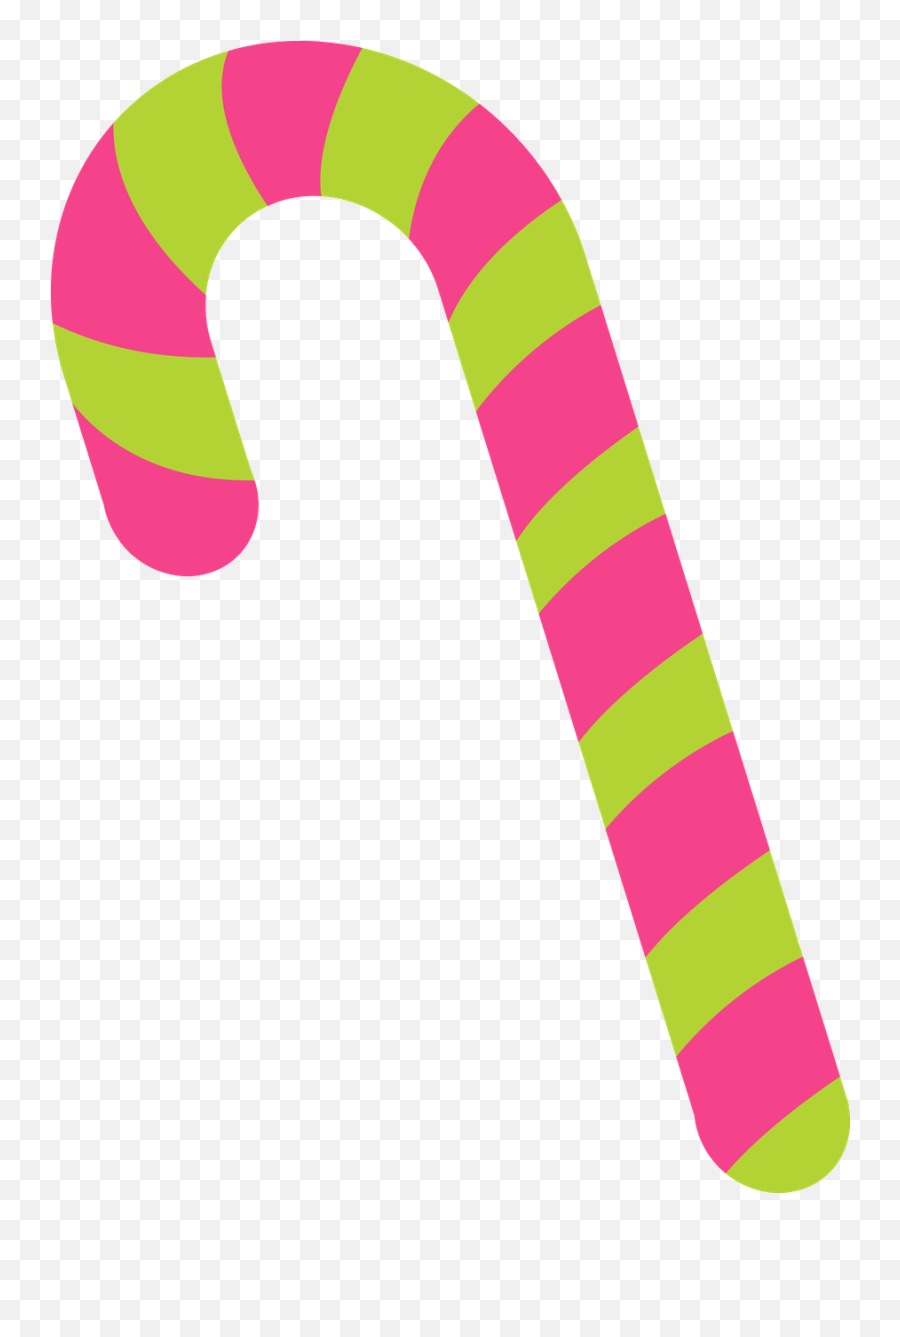 Candy Cane Clipart Png - Rainbow Candy Cane Clipart Pink Candy Cane Clipart,Candycane Png